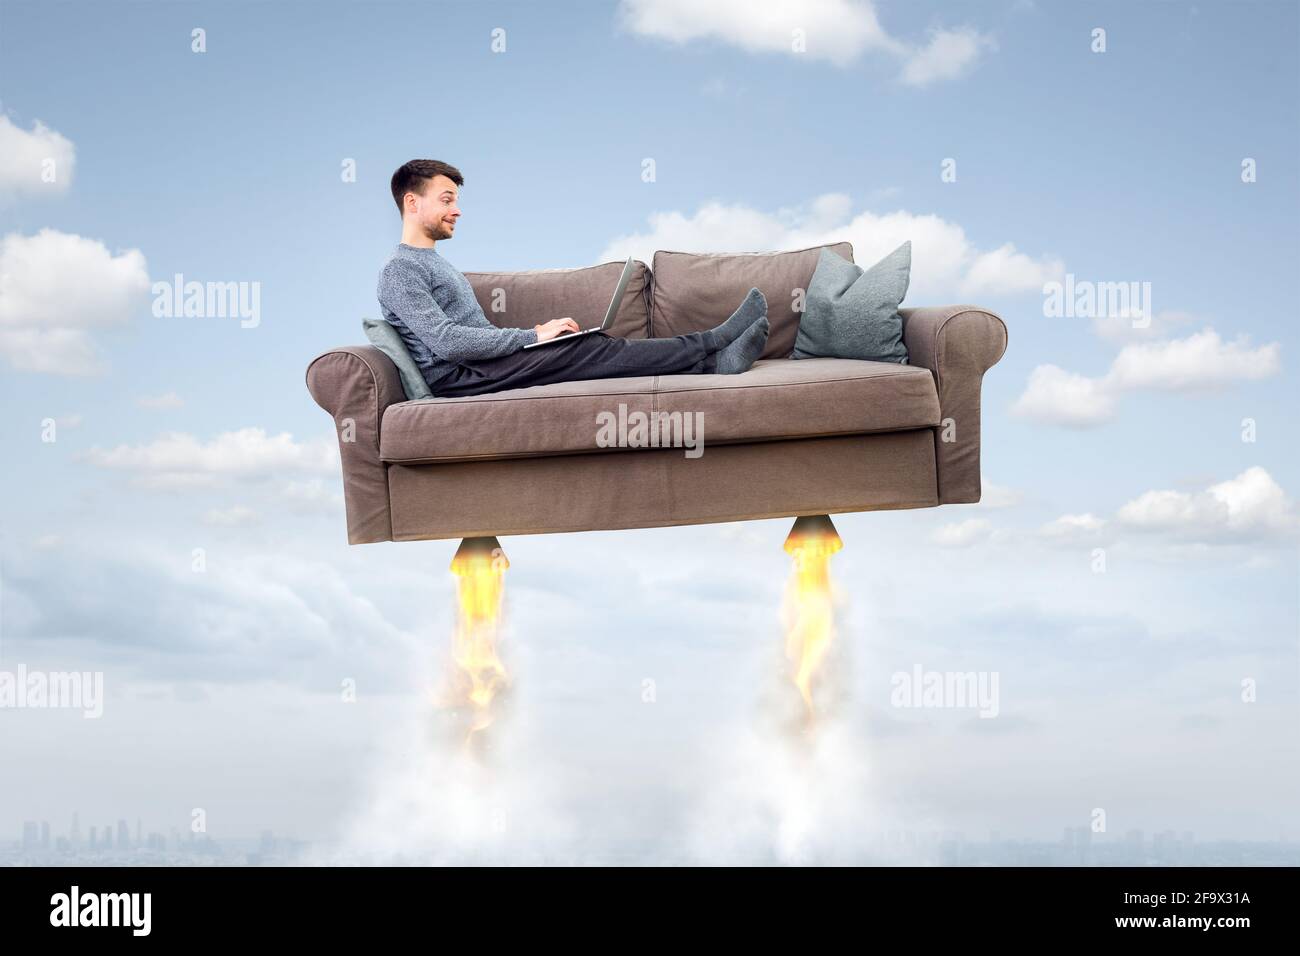 Man flying on a rocket sofa while using a laptop Stock Photo